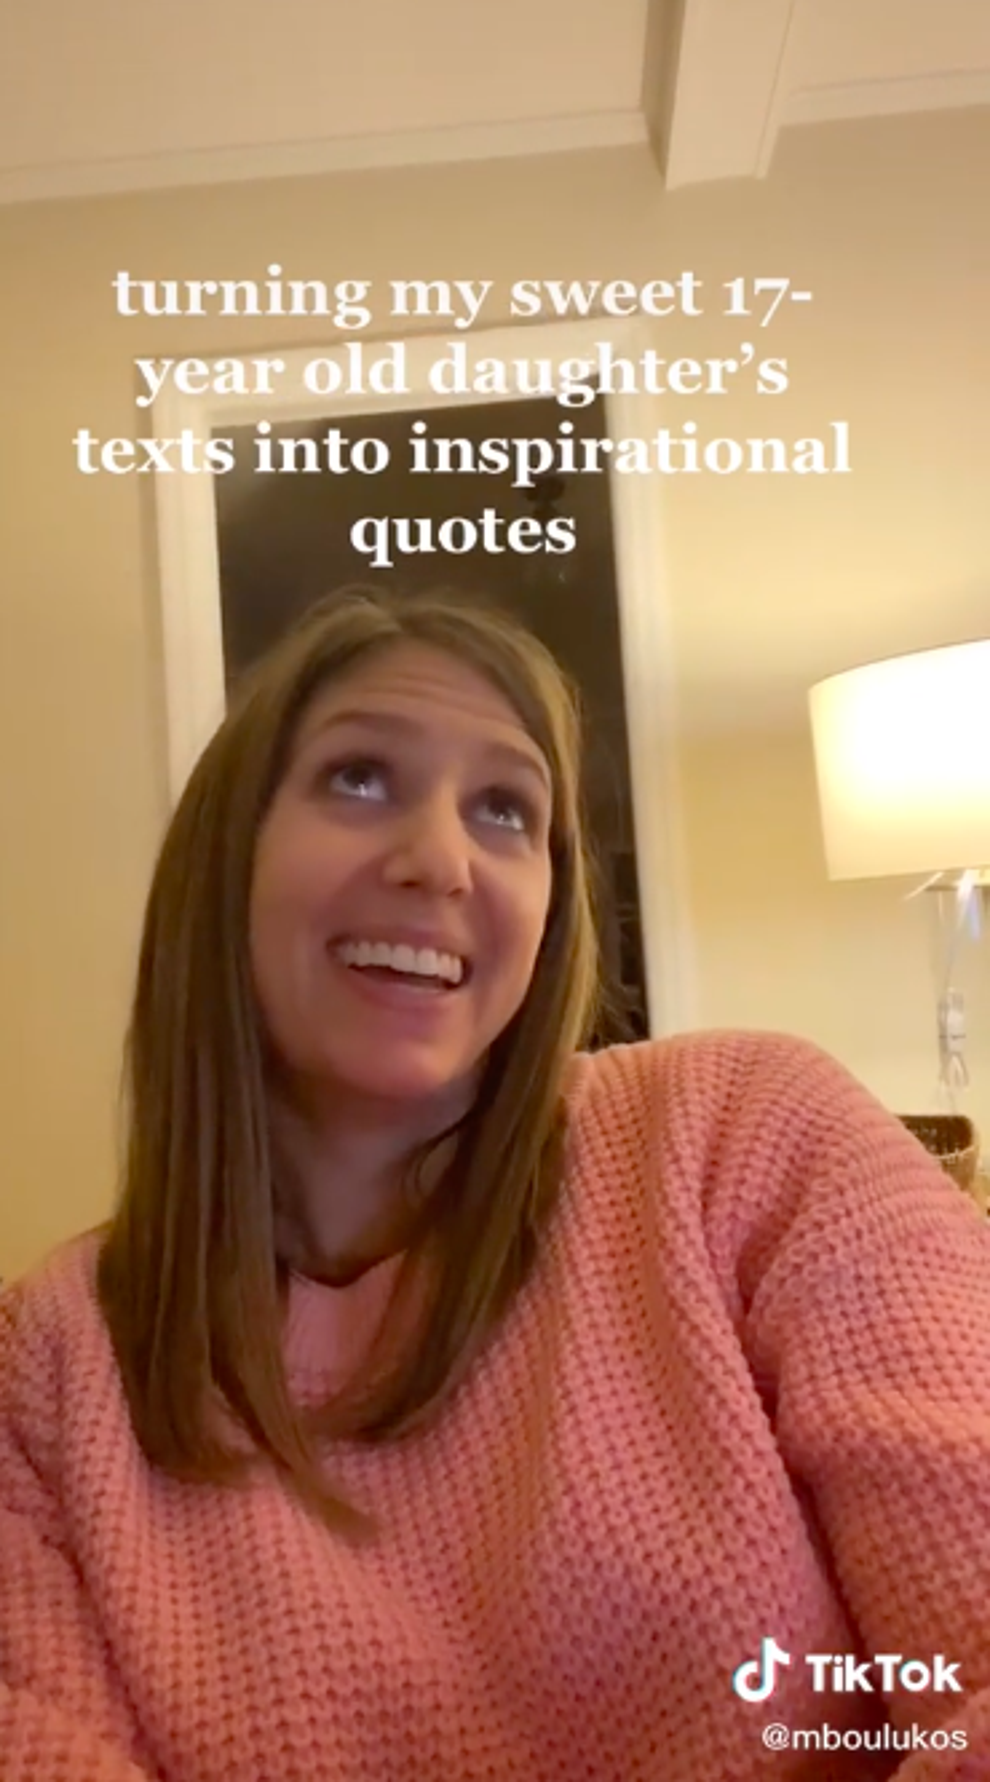 The Inspirational Quotes Trend On TikTok Is Hilarious